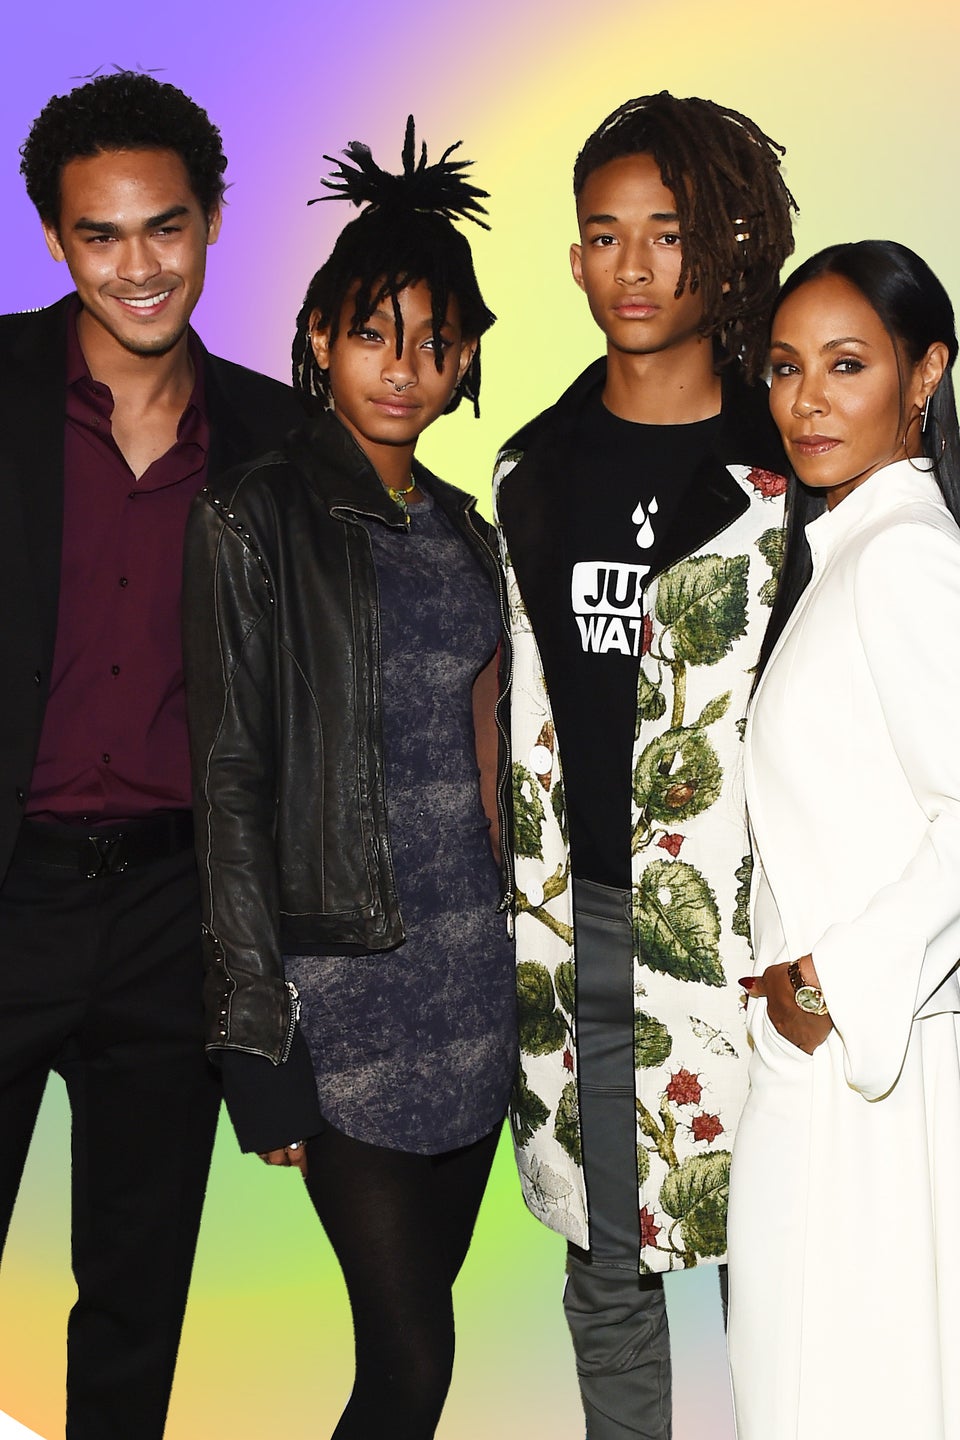 Jada Pinkett-Smith Admits She’s Had Some ‘Concerns’ About Her Sons’ Dating Choices